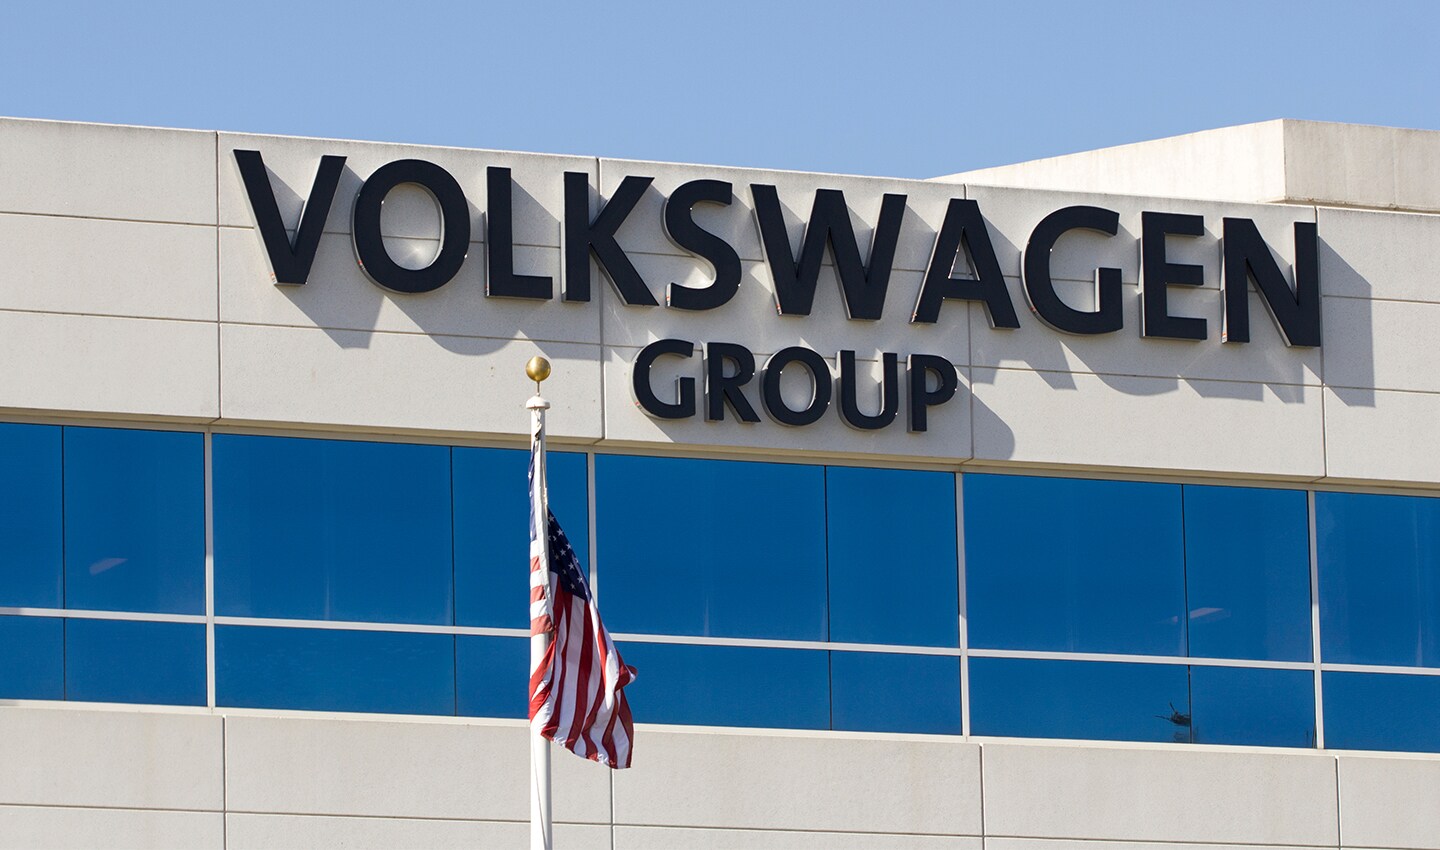 Volkswagen Group is one of the world’s largest carmakers, responsible for automotive brands such as VW, Audi, Seat, Skoda, Lamborghini, Porsche and Bentley.